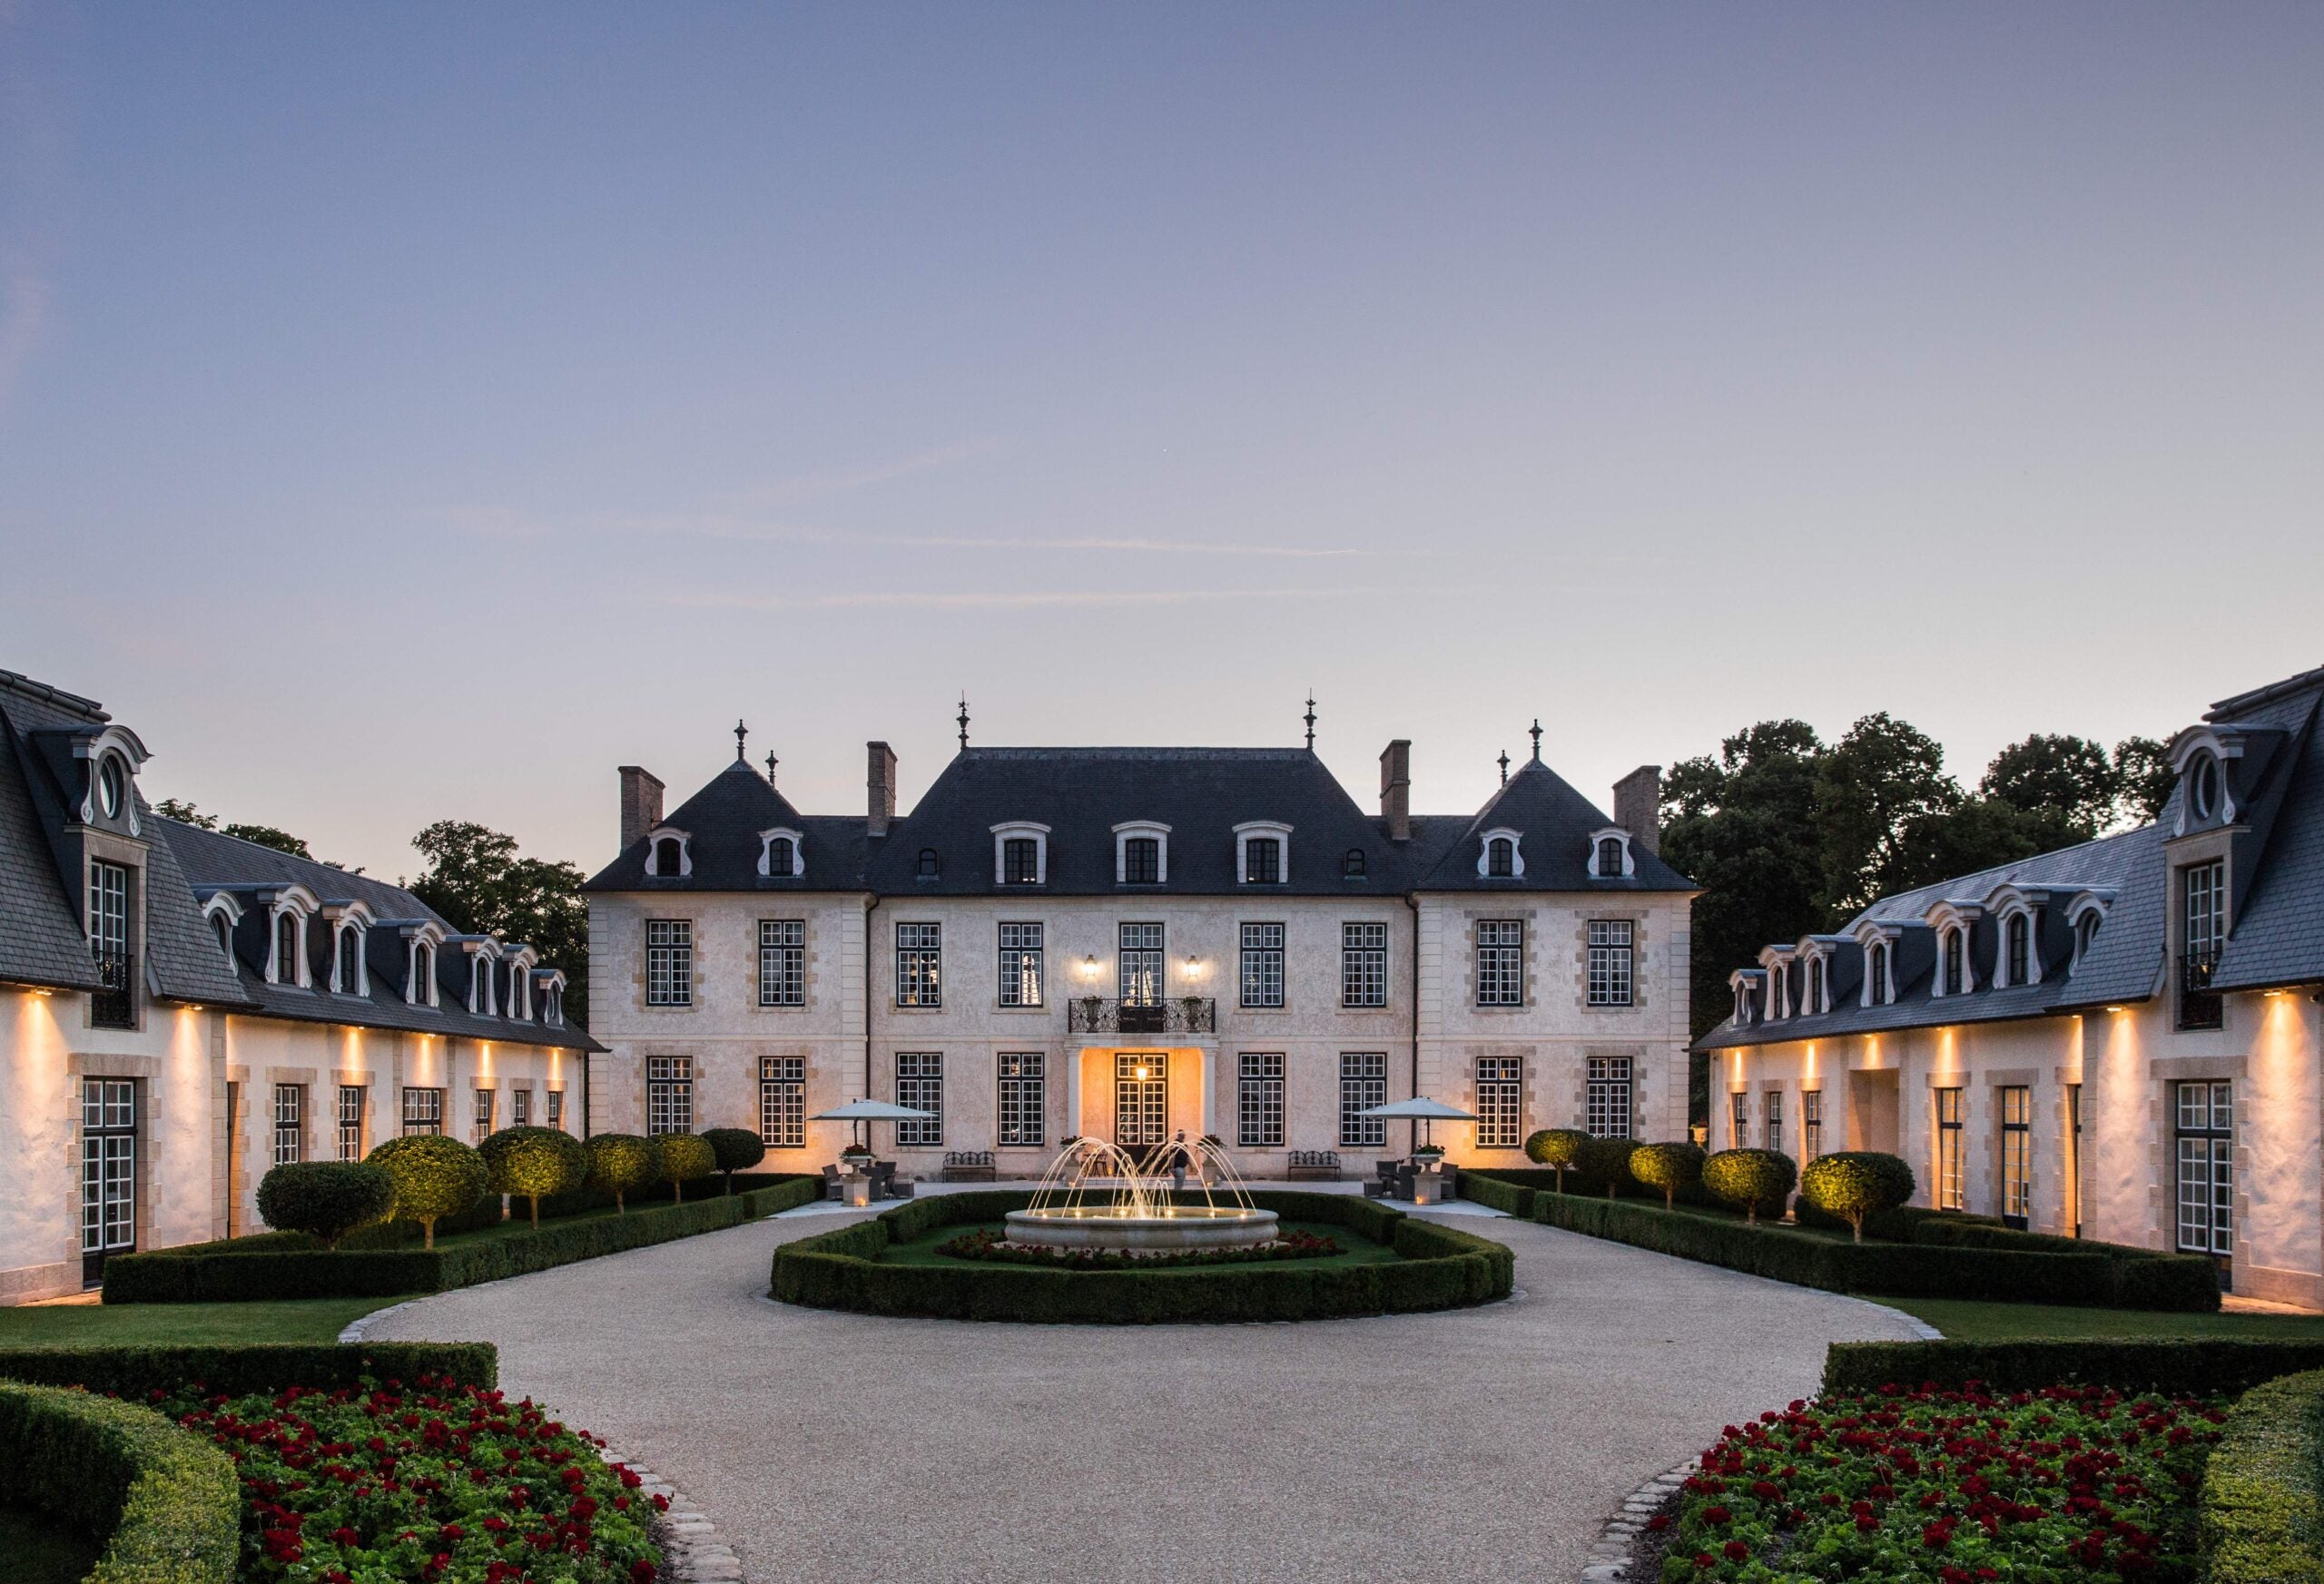 France's Chateau du Coudreceau debuts in the world of luxury golf